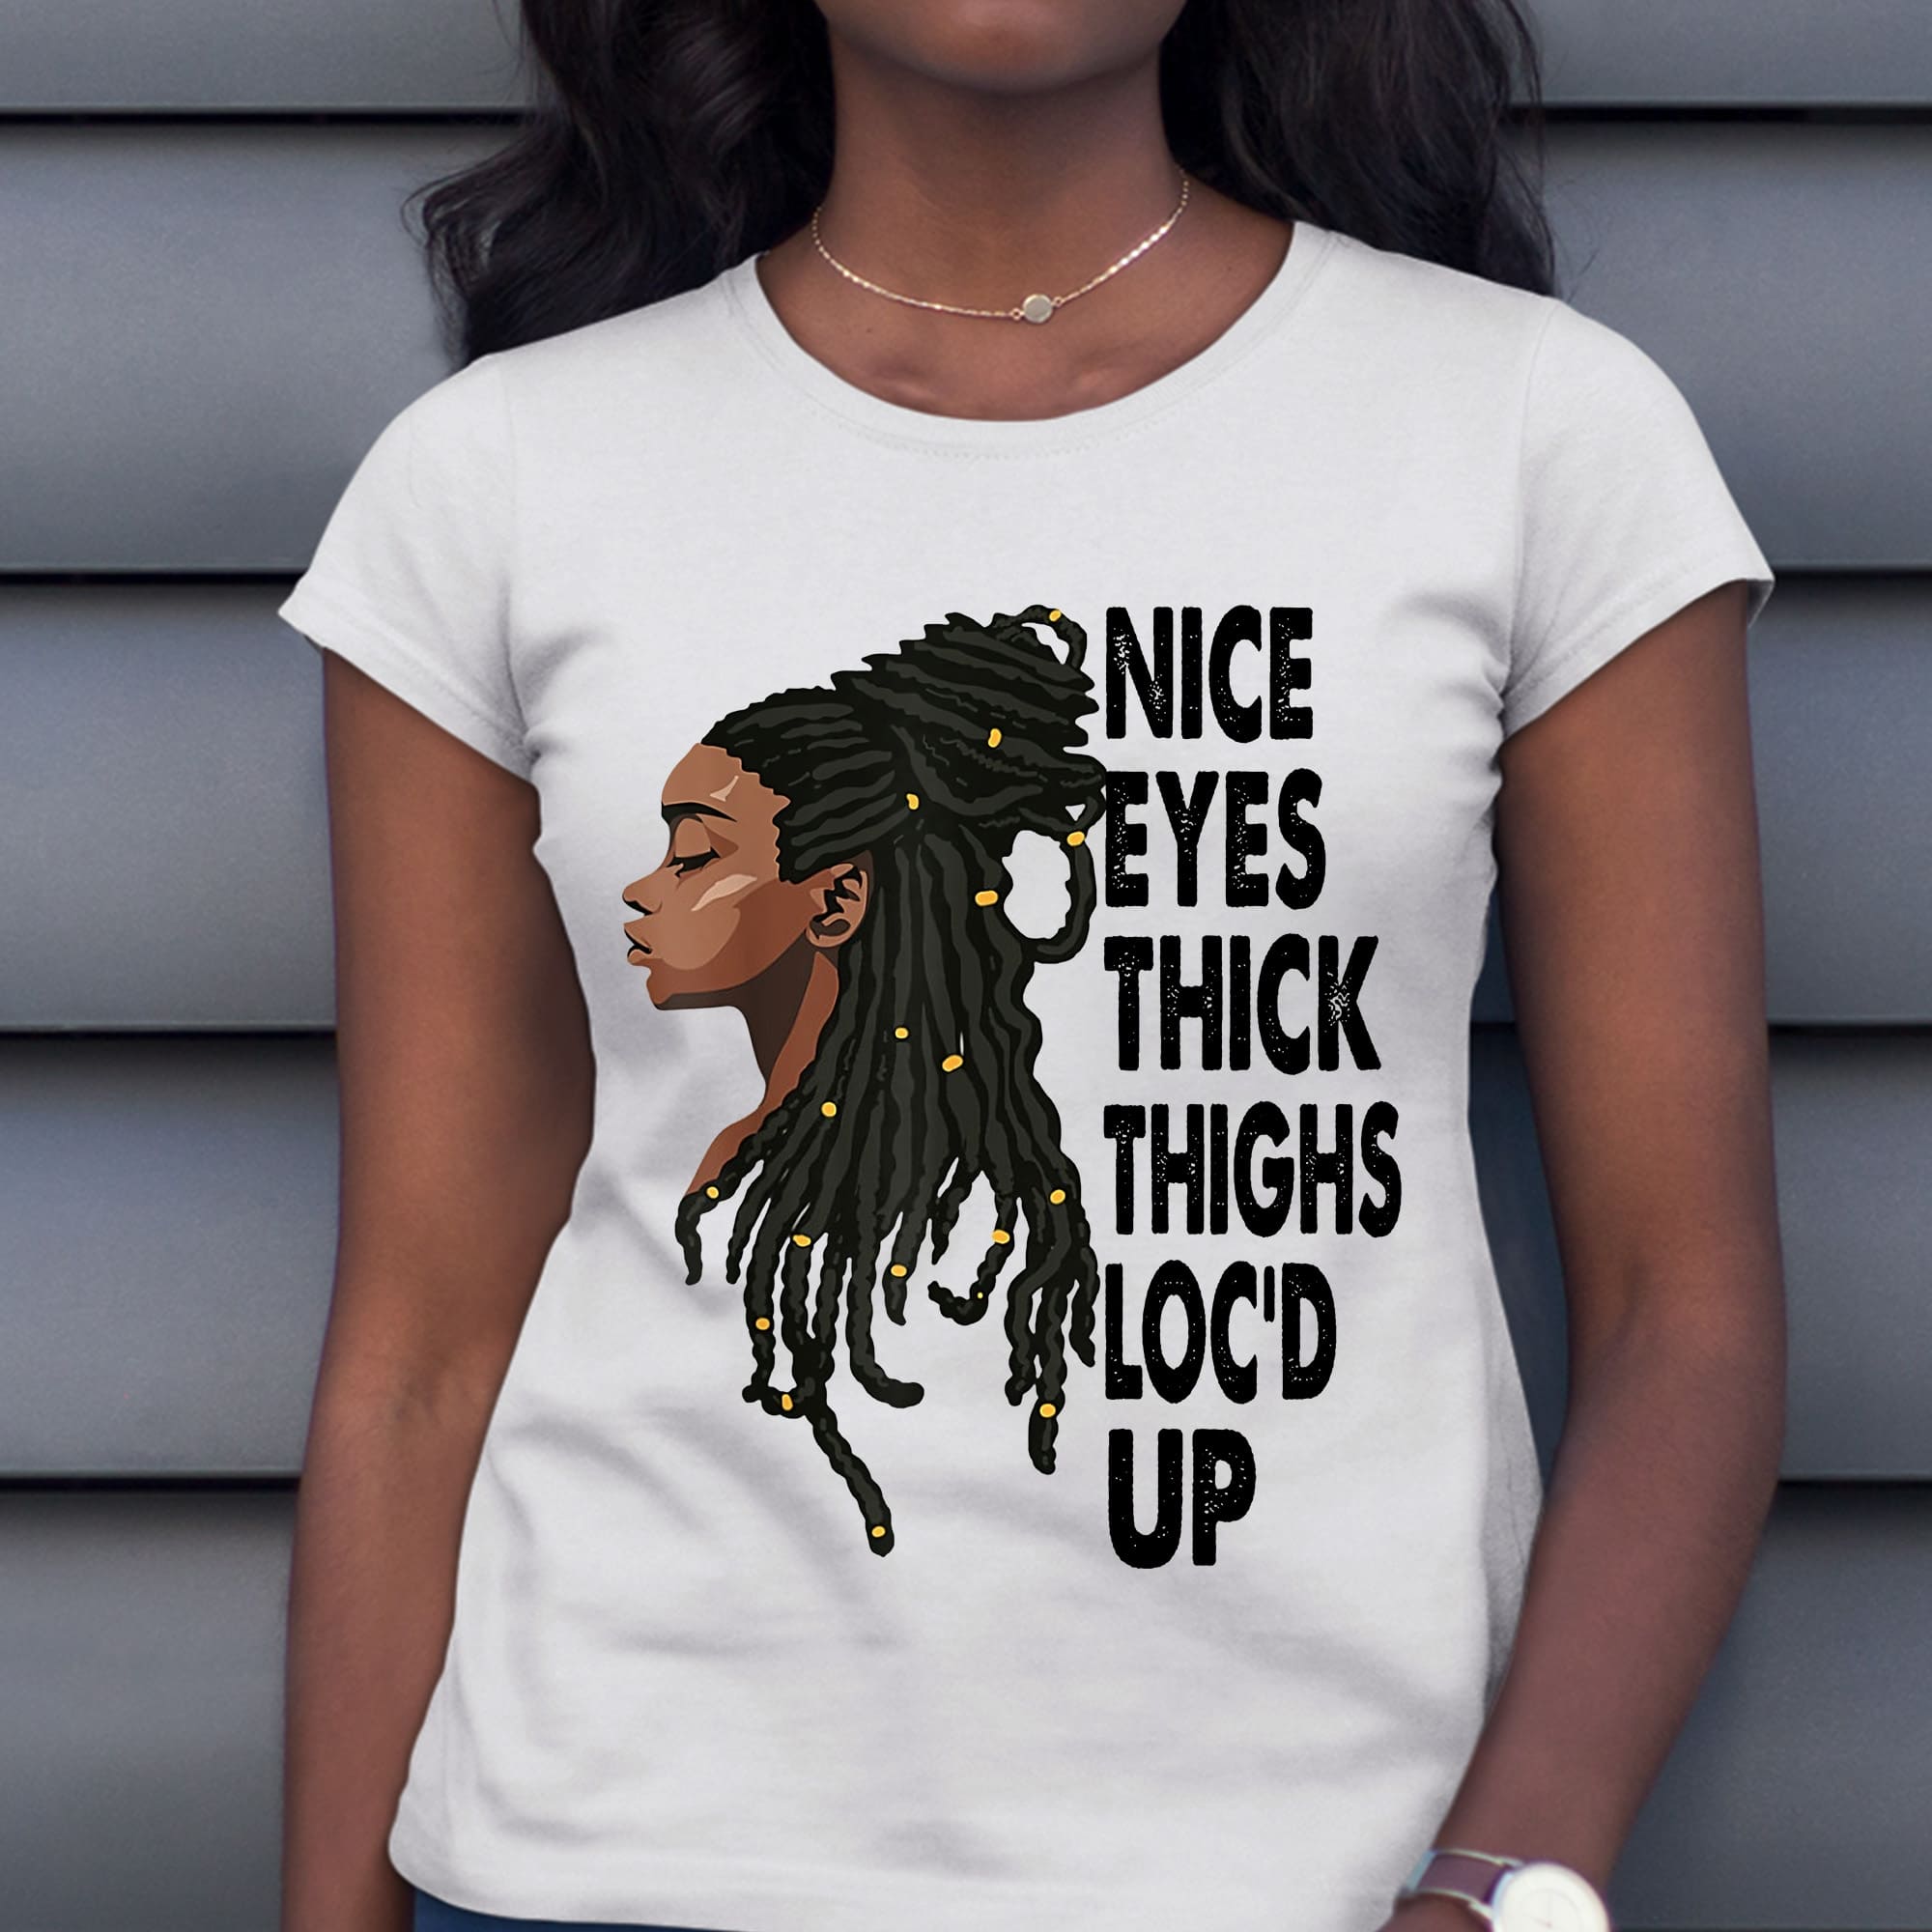 Native Black Woman - Nice eyes thick thighs loc'd up